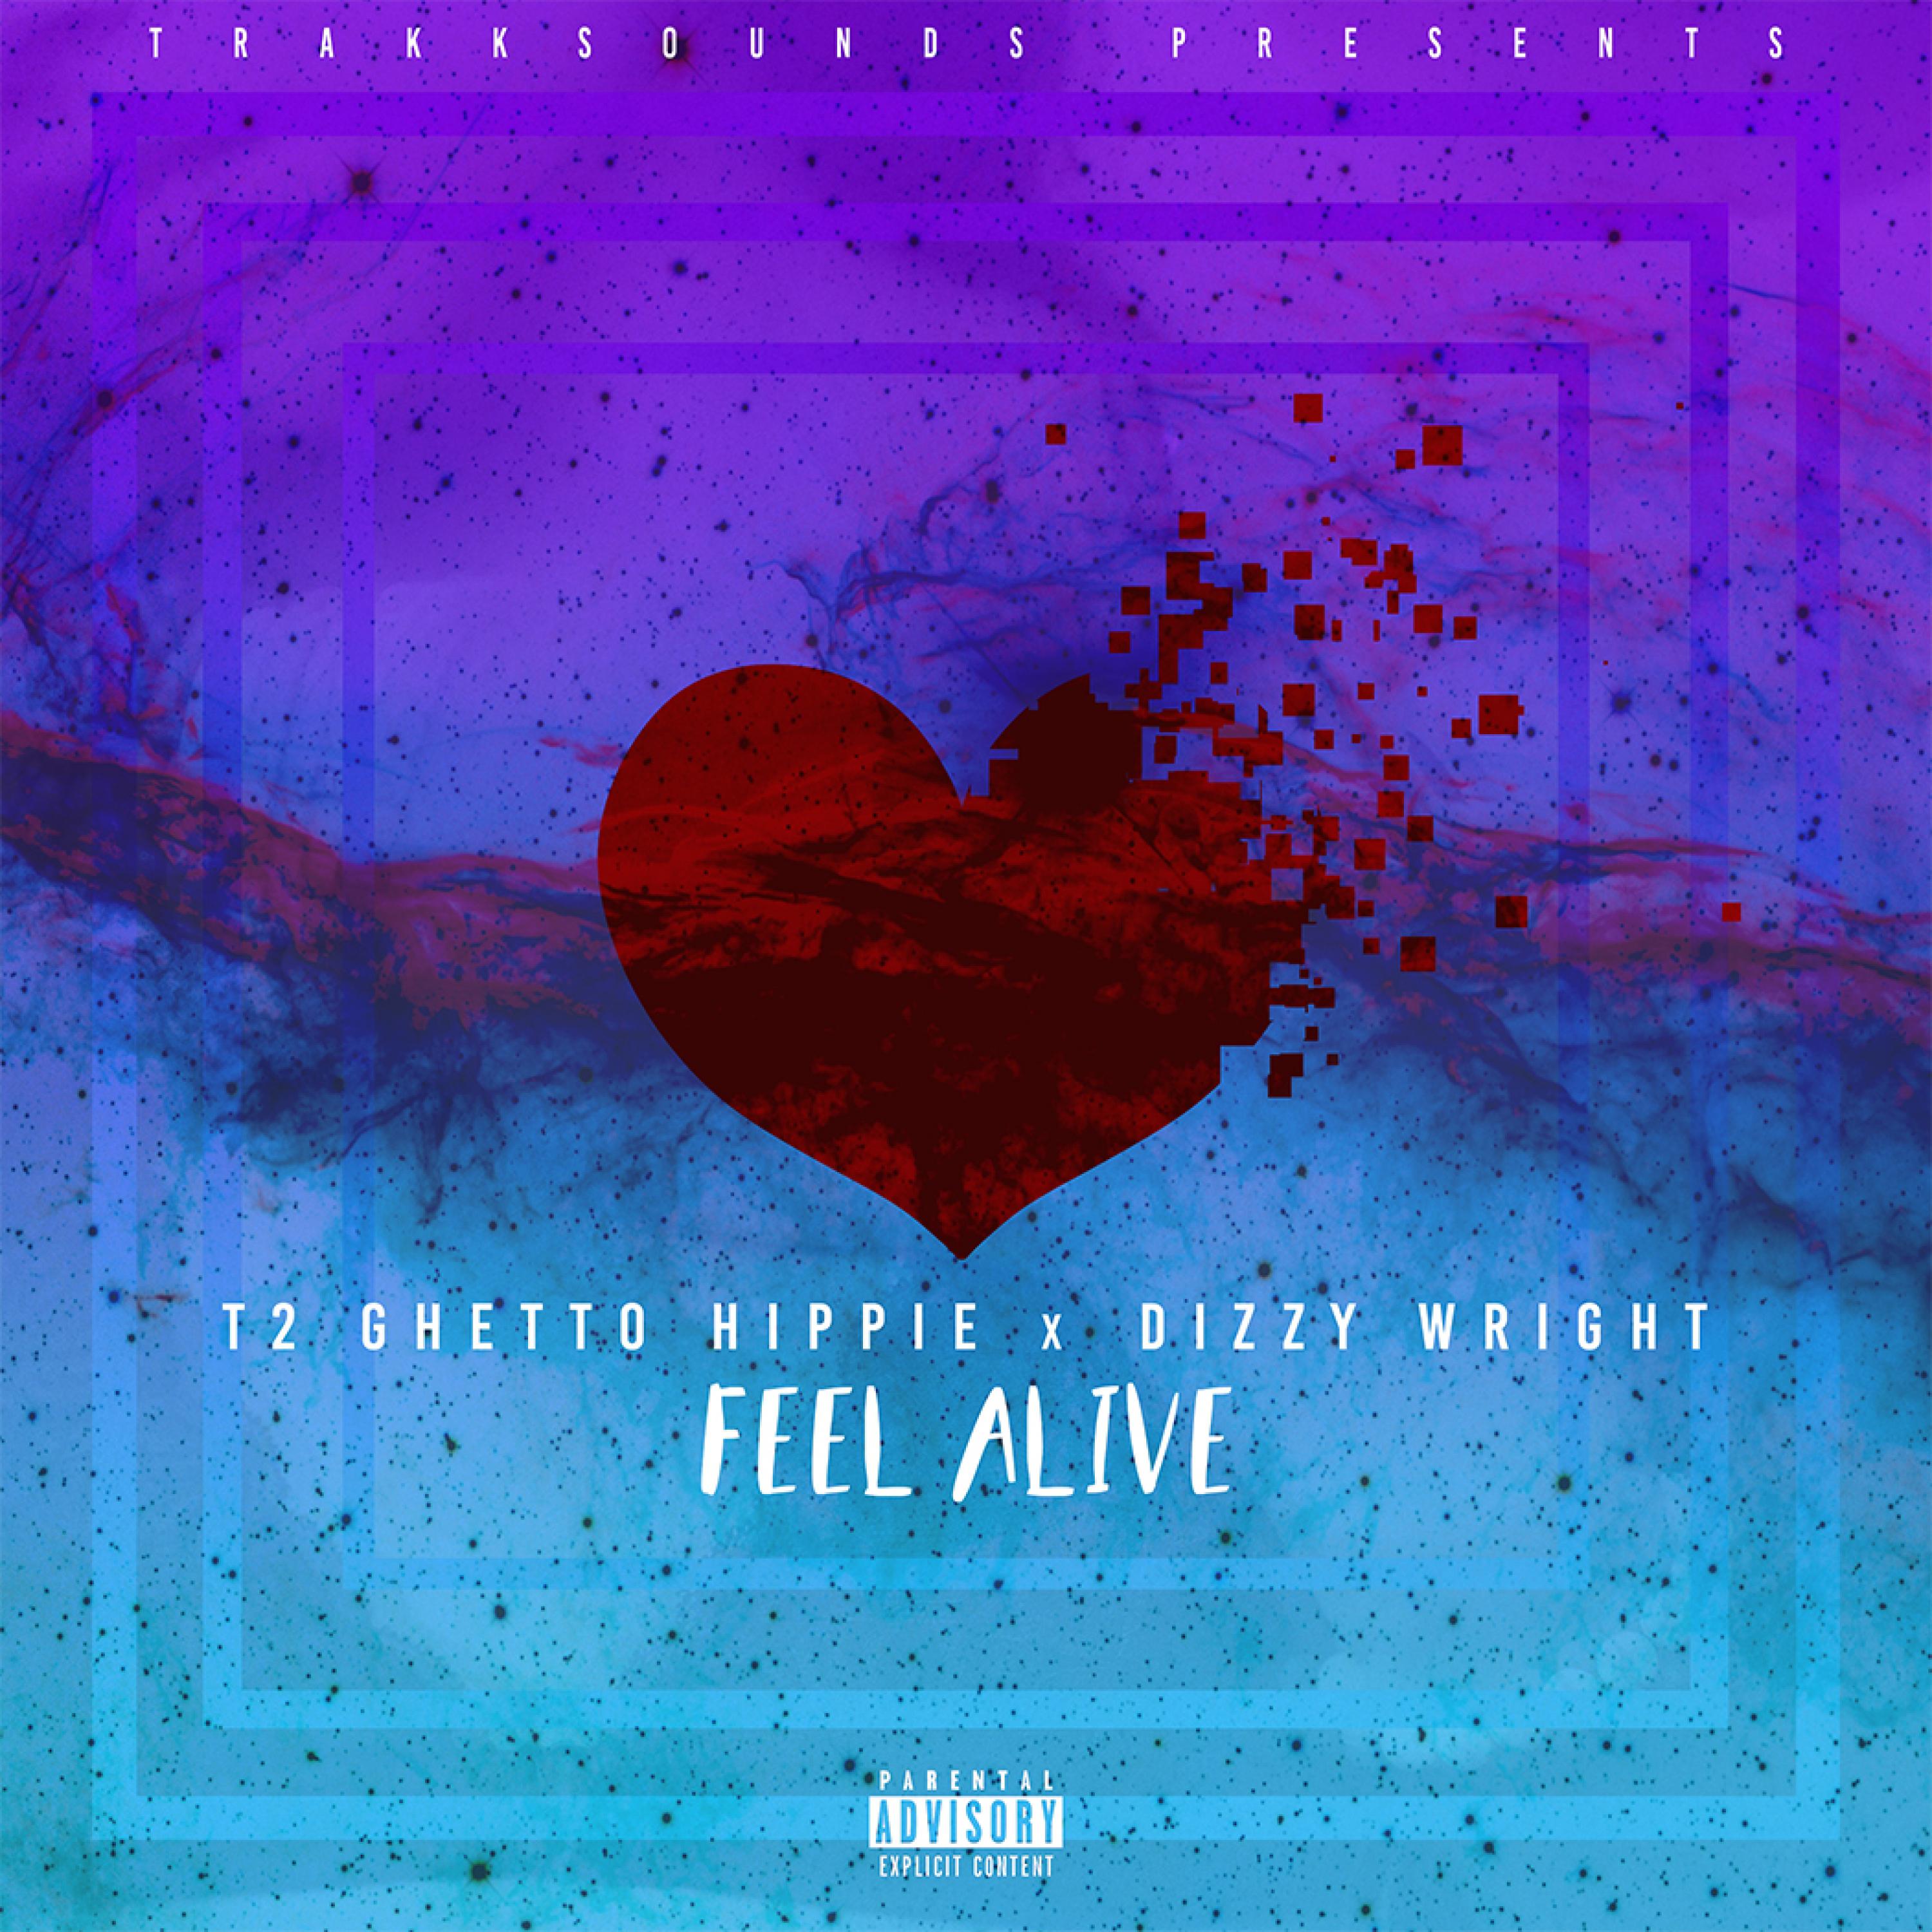 Feel Alive (feat. T2 The Ghetto Hippie & Dizzy Wright)